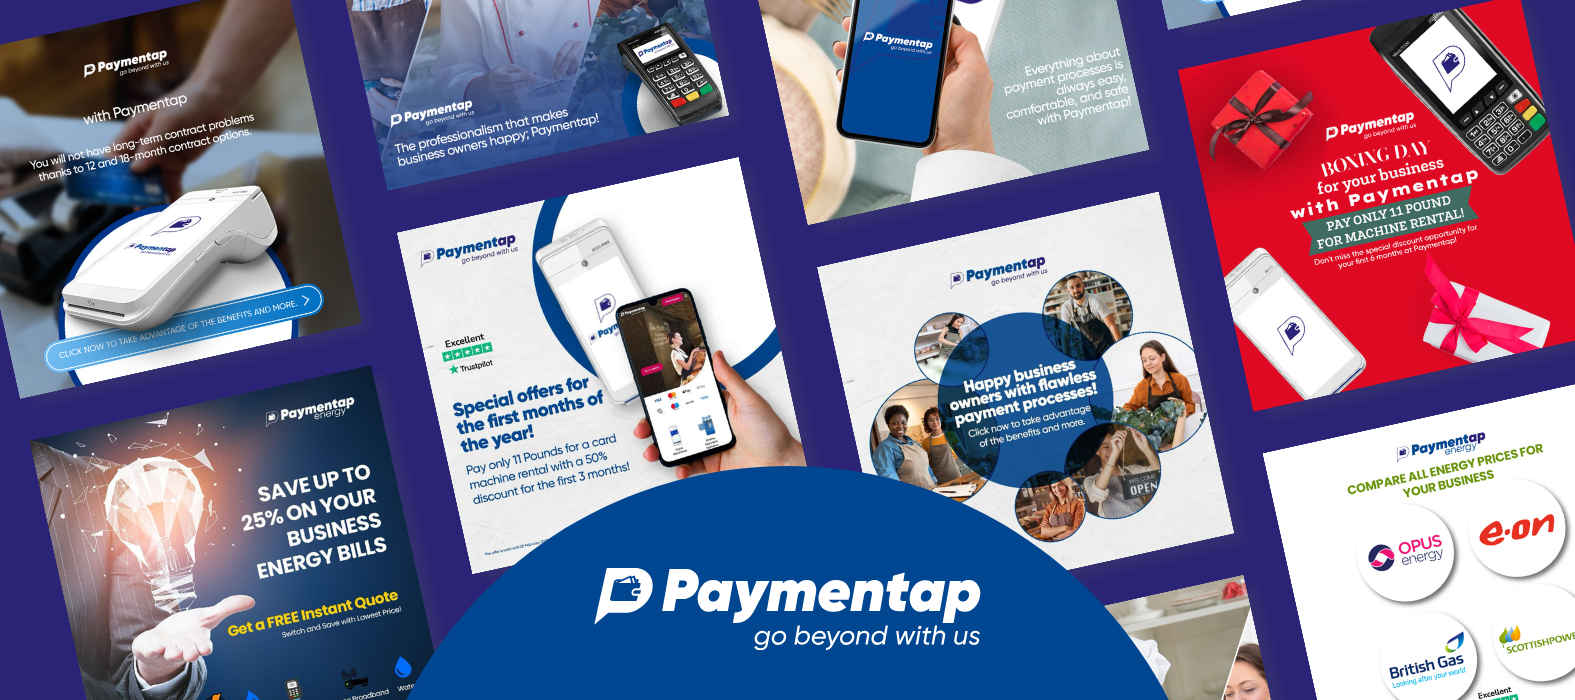 paymentap ads images